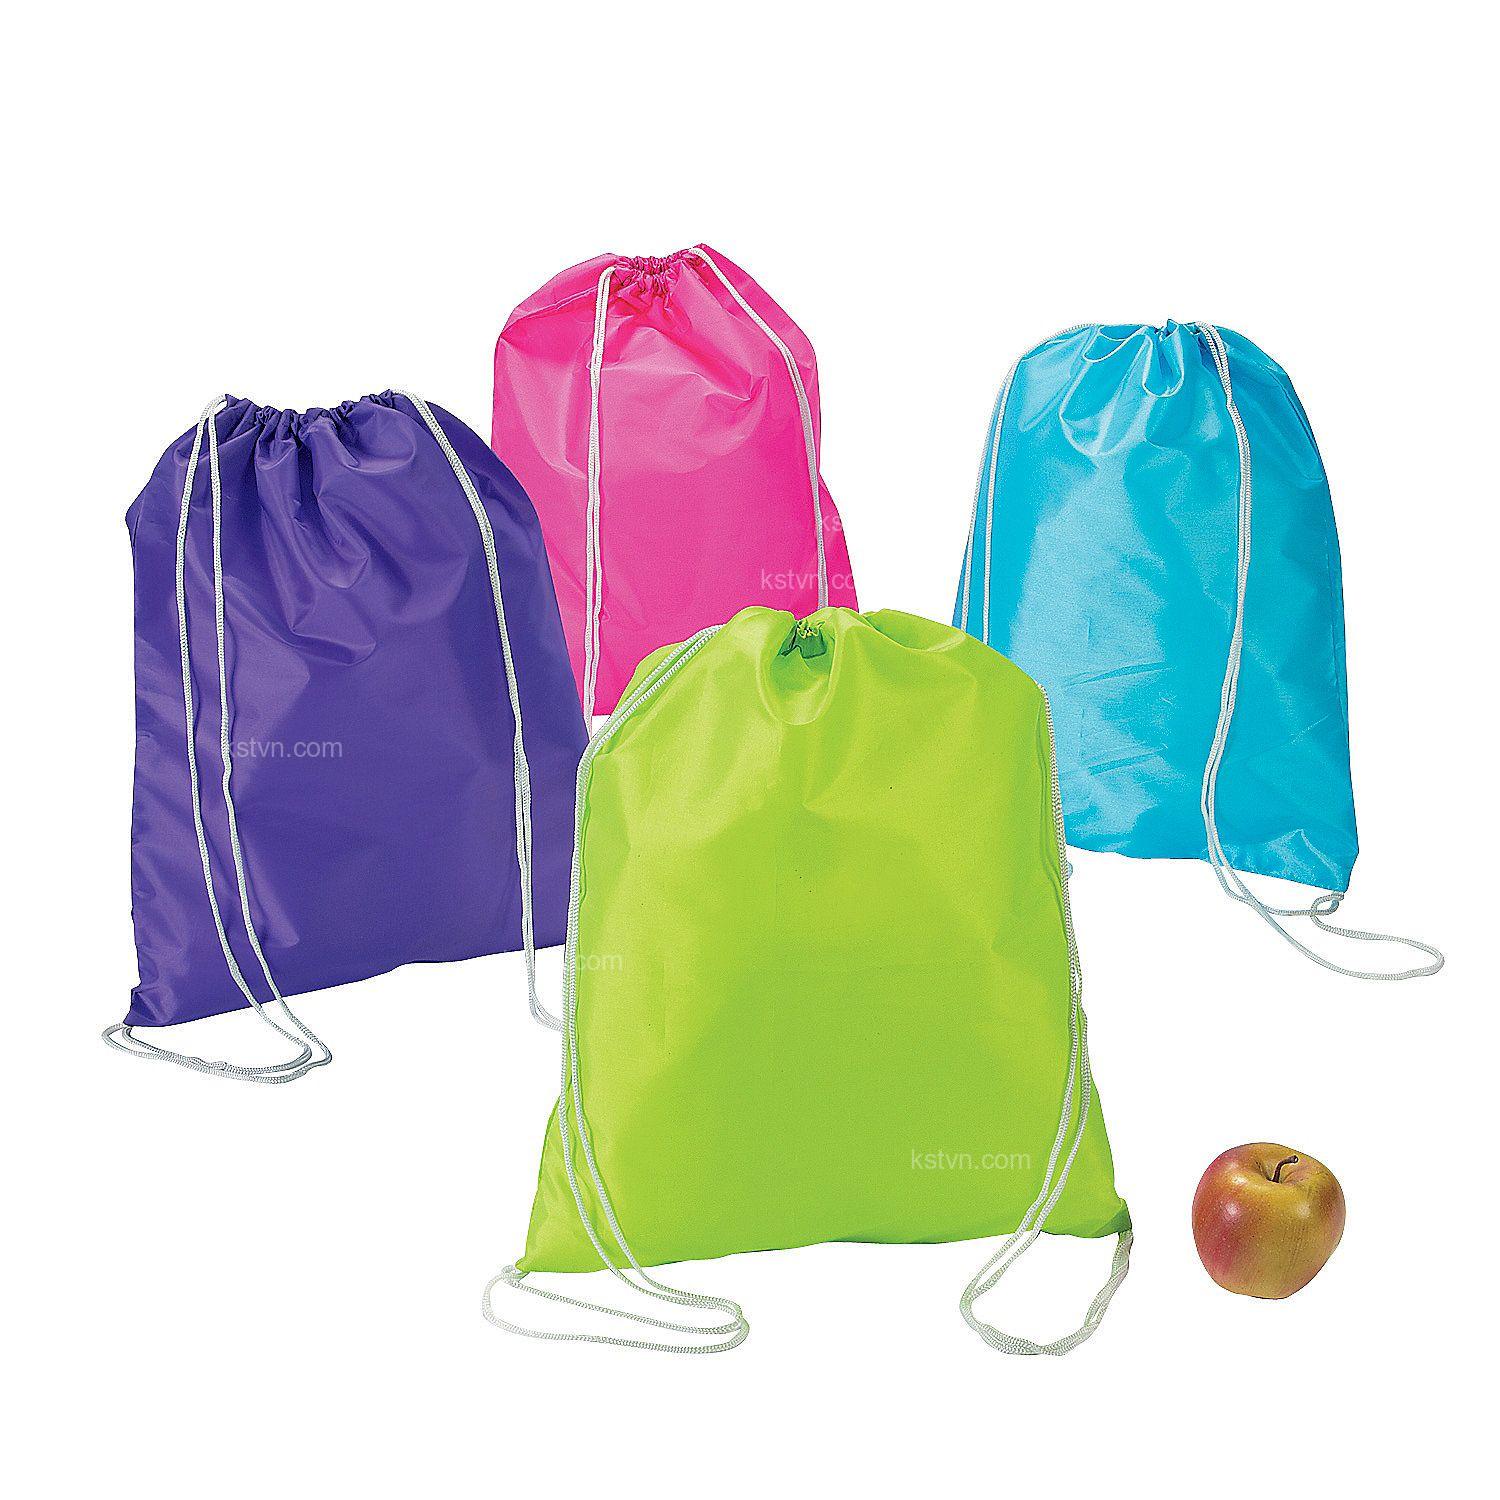 Brighten up your style with a colorful drawstring bag